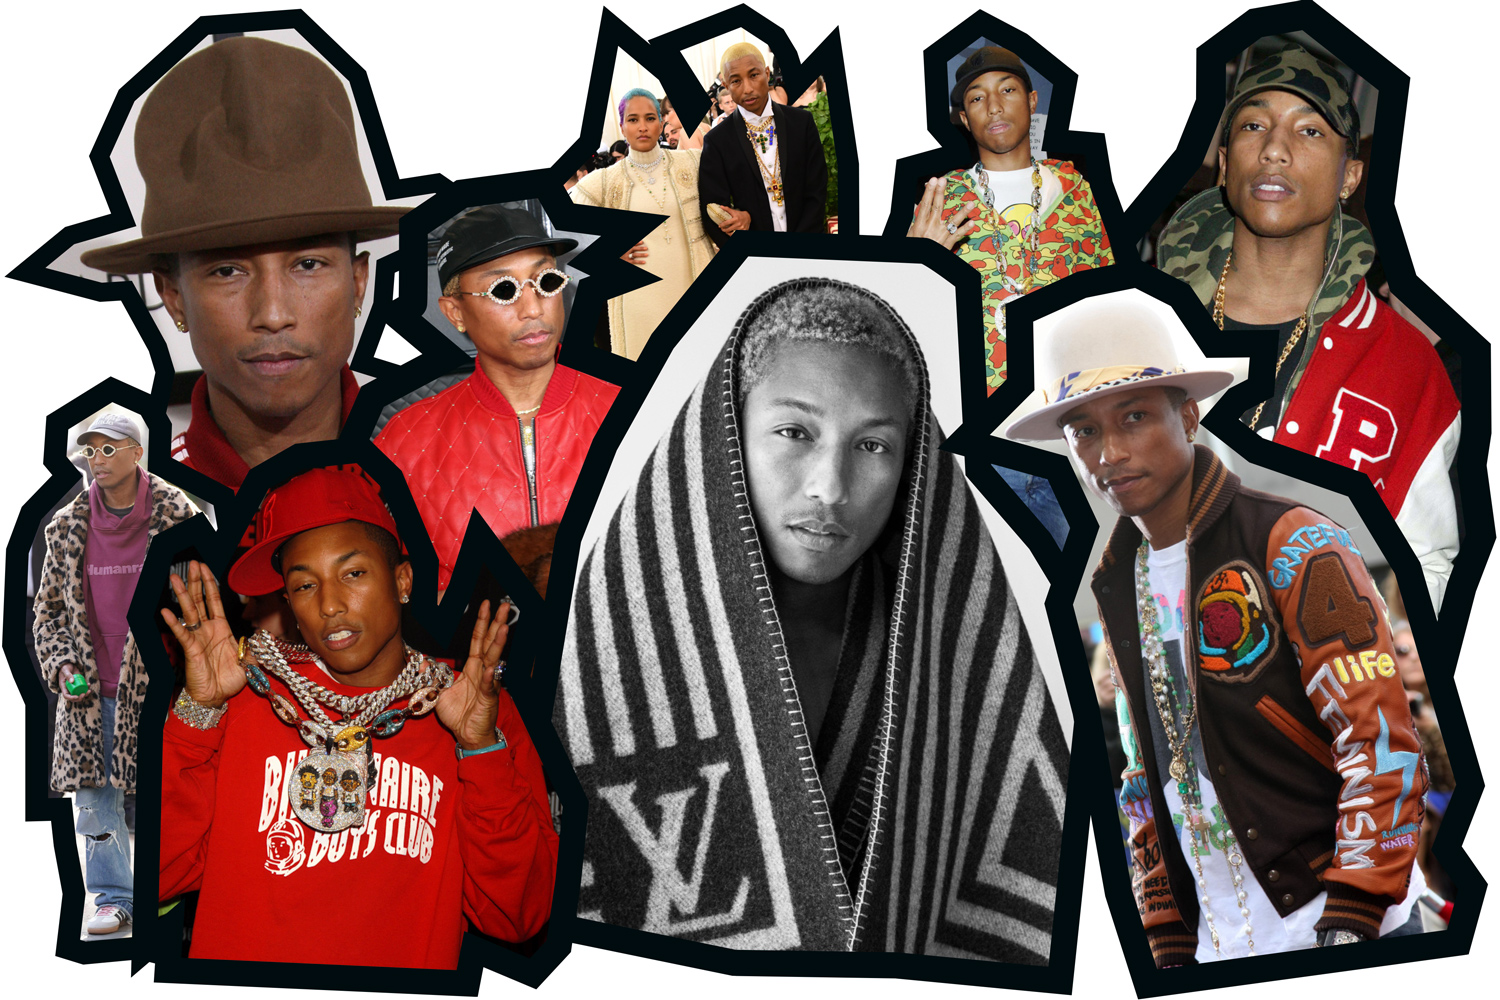 highsnobiety on X: Louis Vuitton x Pharrell Williams Begins (2004) This  year marked Williams' first-ever high-fashion collaboration with Louis  Vuitton. The rapper and burgeoning style visionary, along with NIGO,  created the iconic